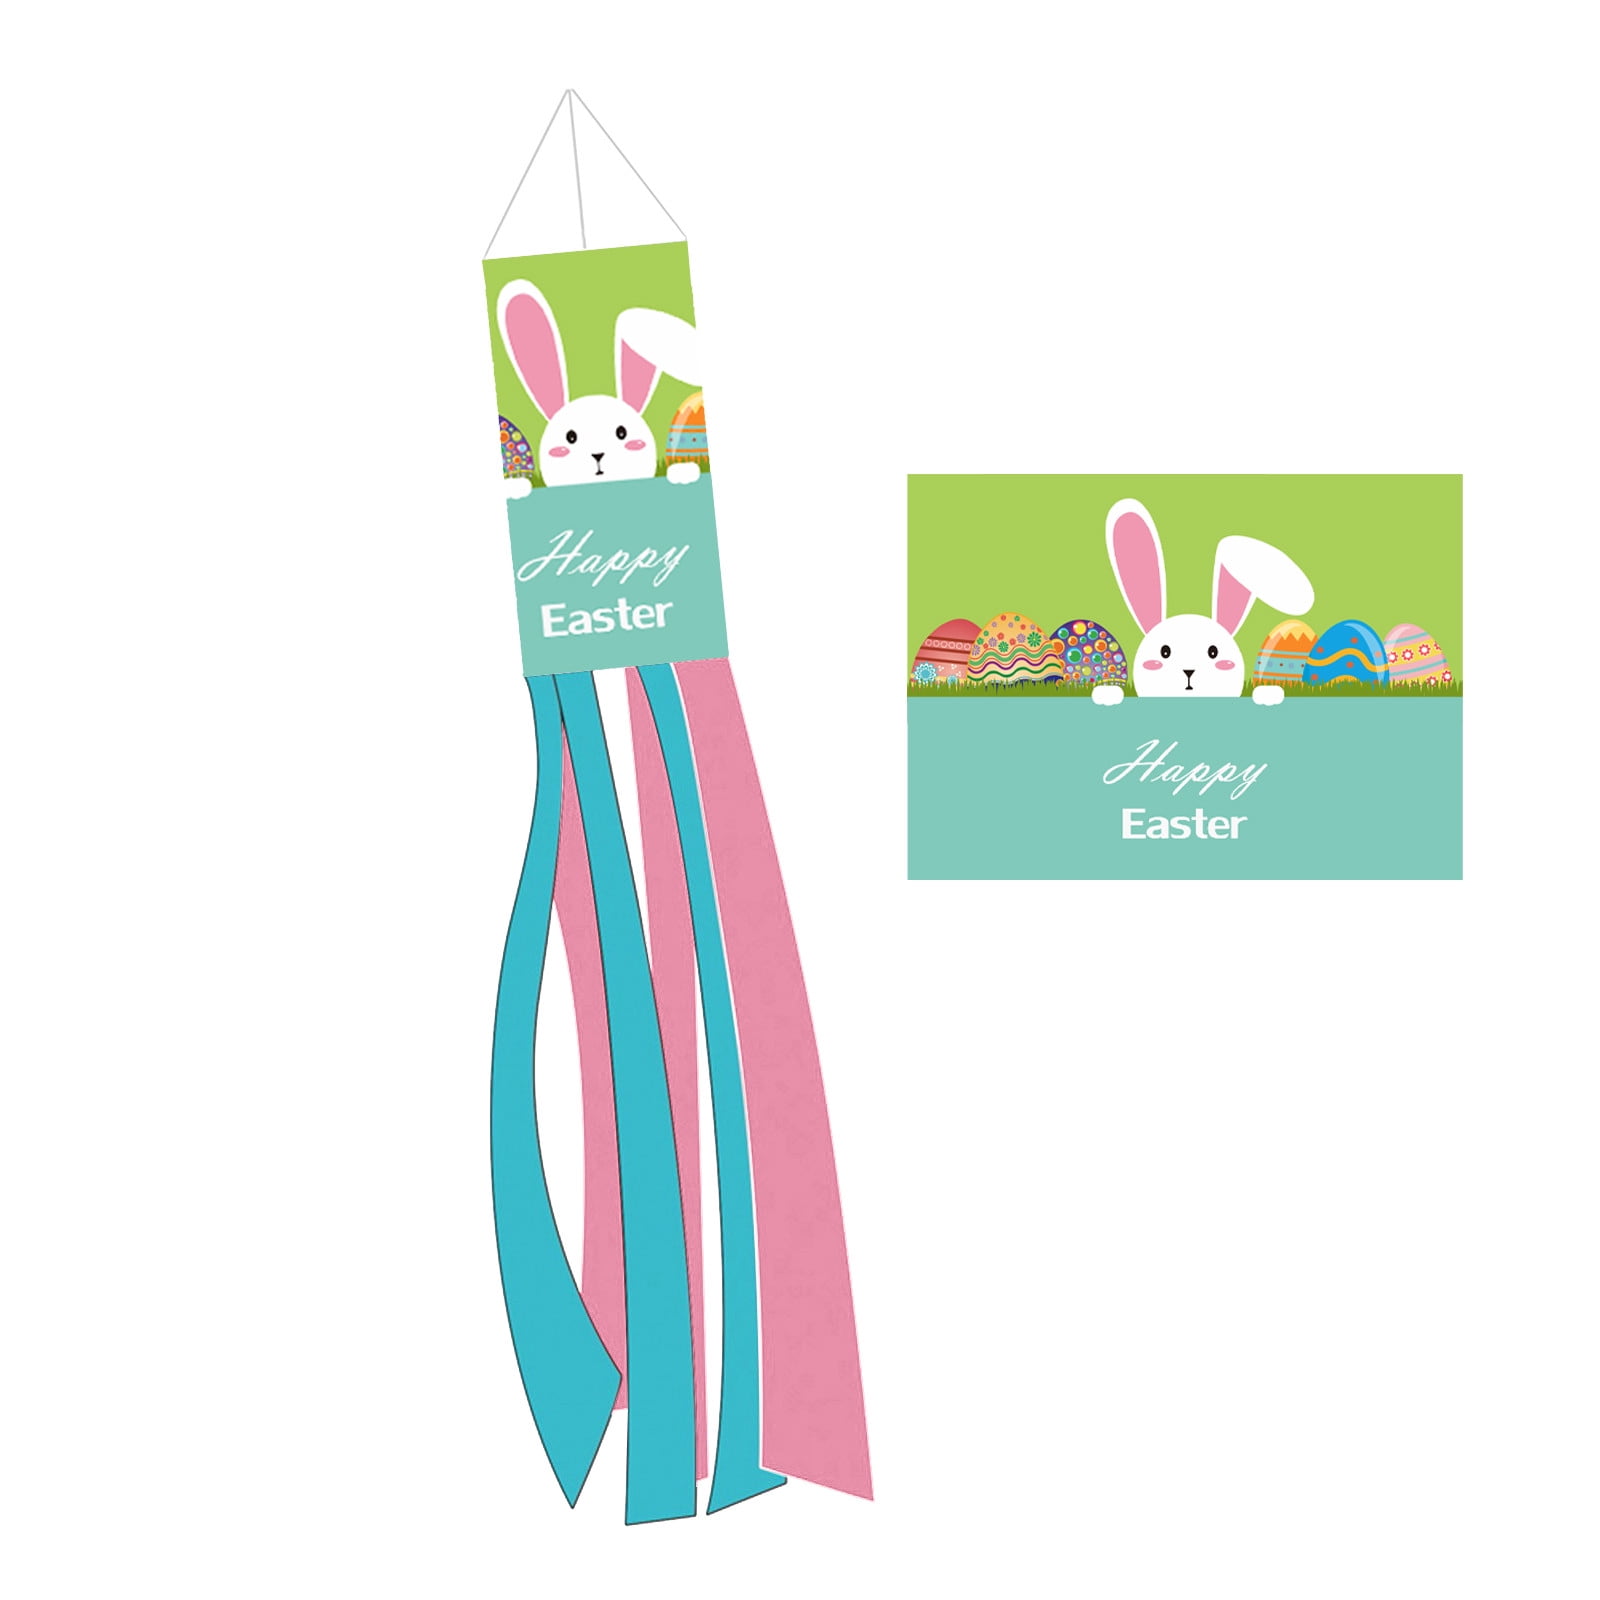 Happy Easter Windsock Polyester 60 Inch Outdoor Garden Wind Sock Decoration